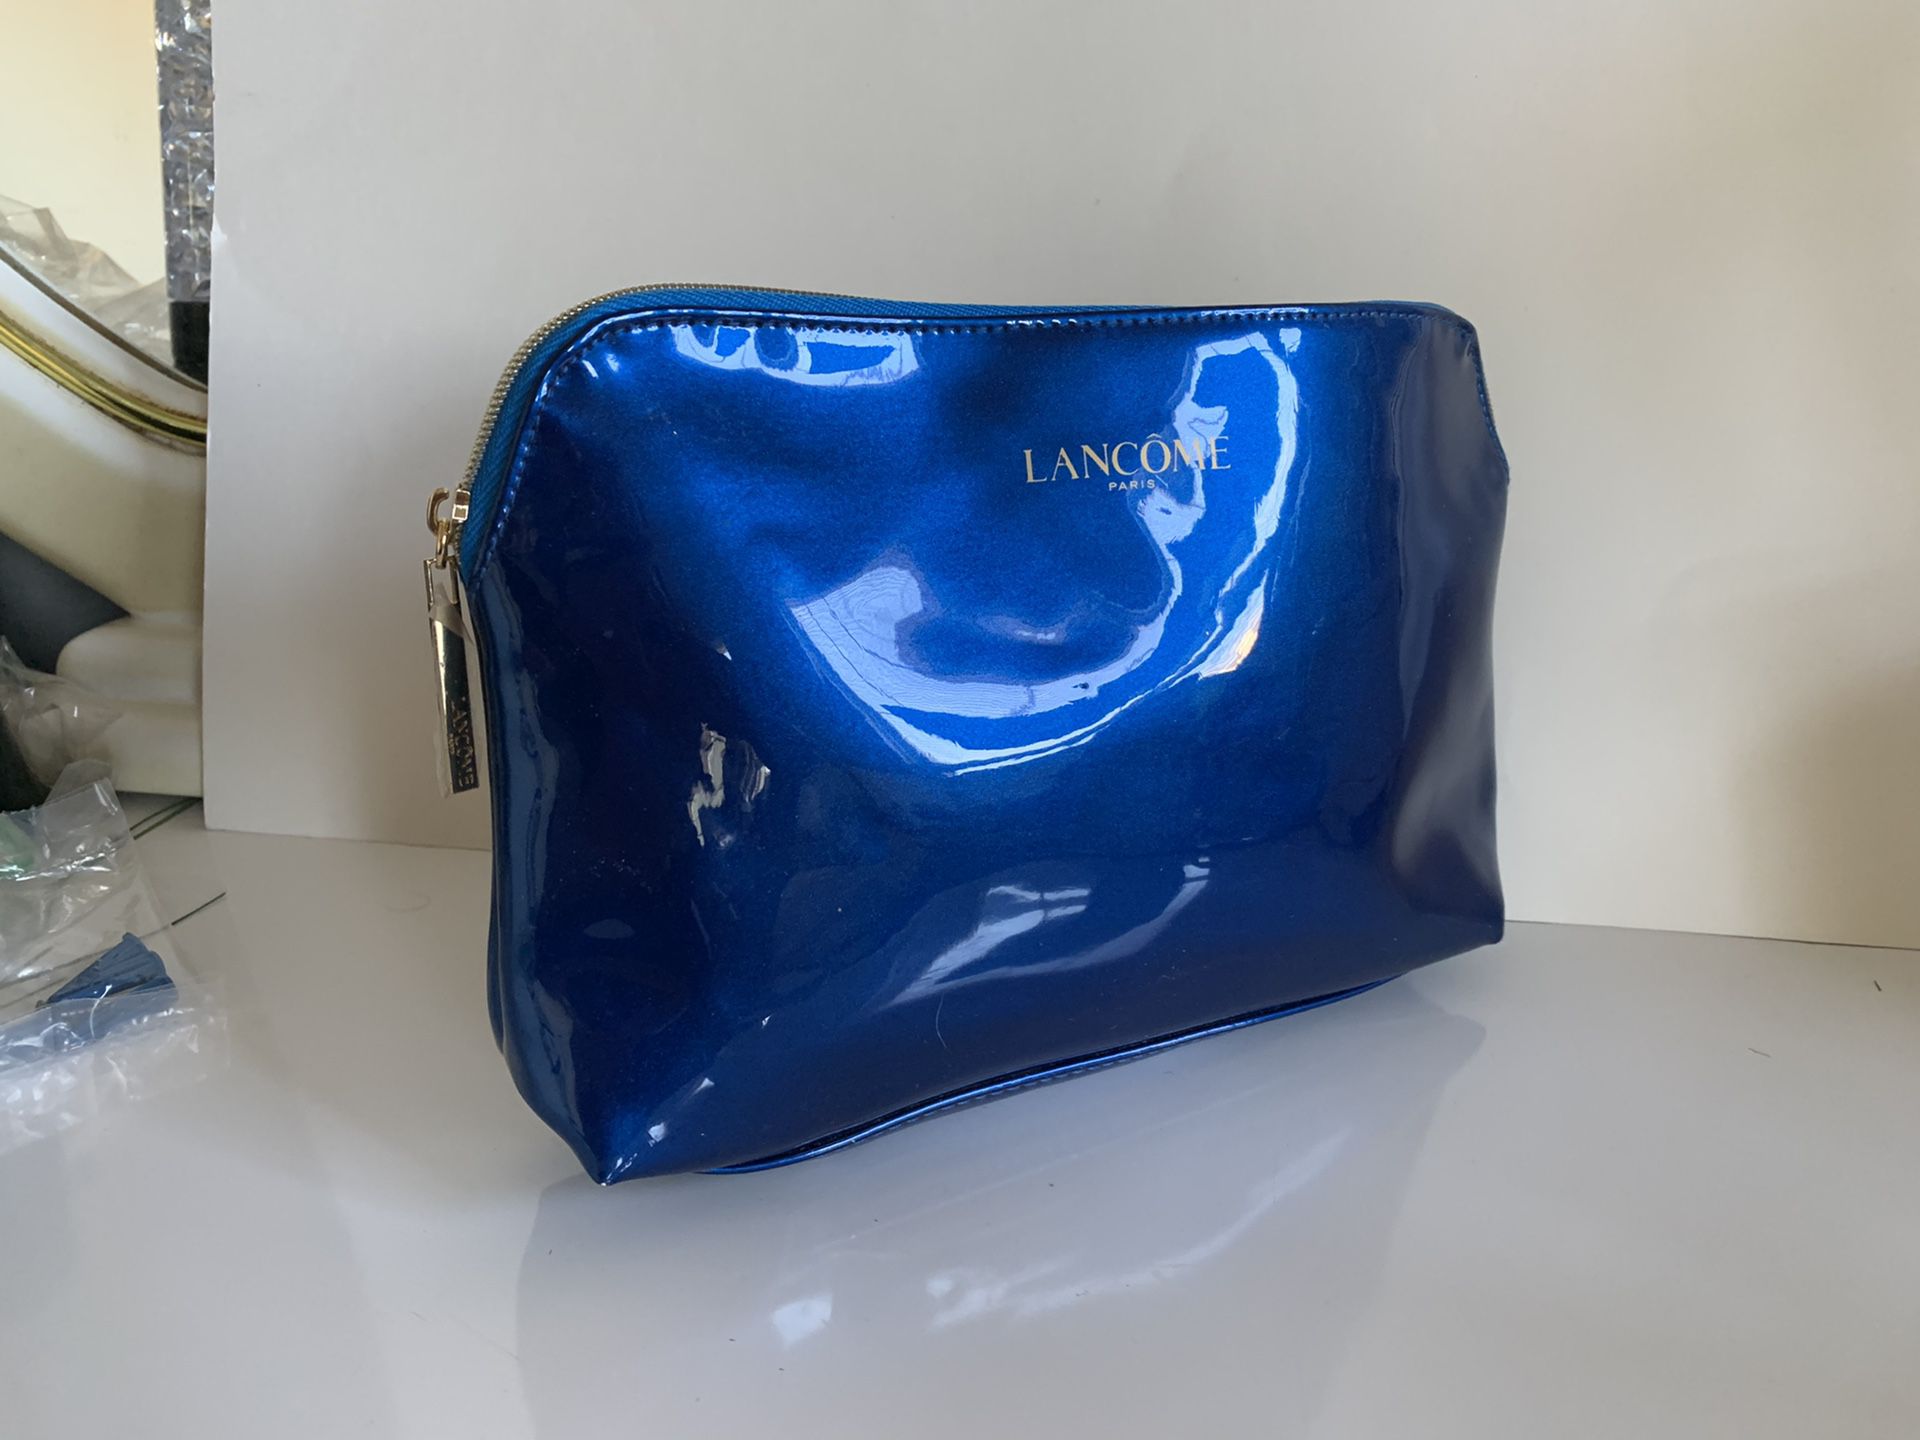 Lancôme cosmetic makeup shiny blue bag. Gold color zipper and handle. Shipped with USPS First Class.